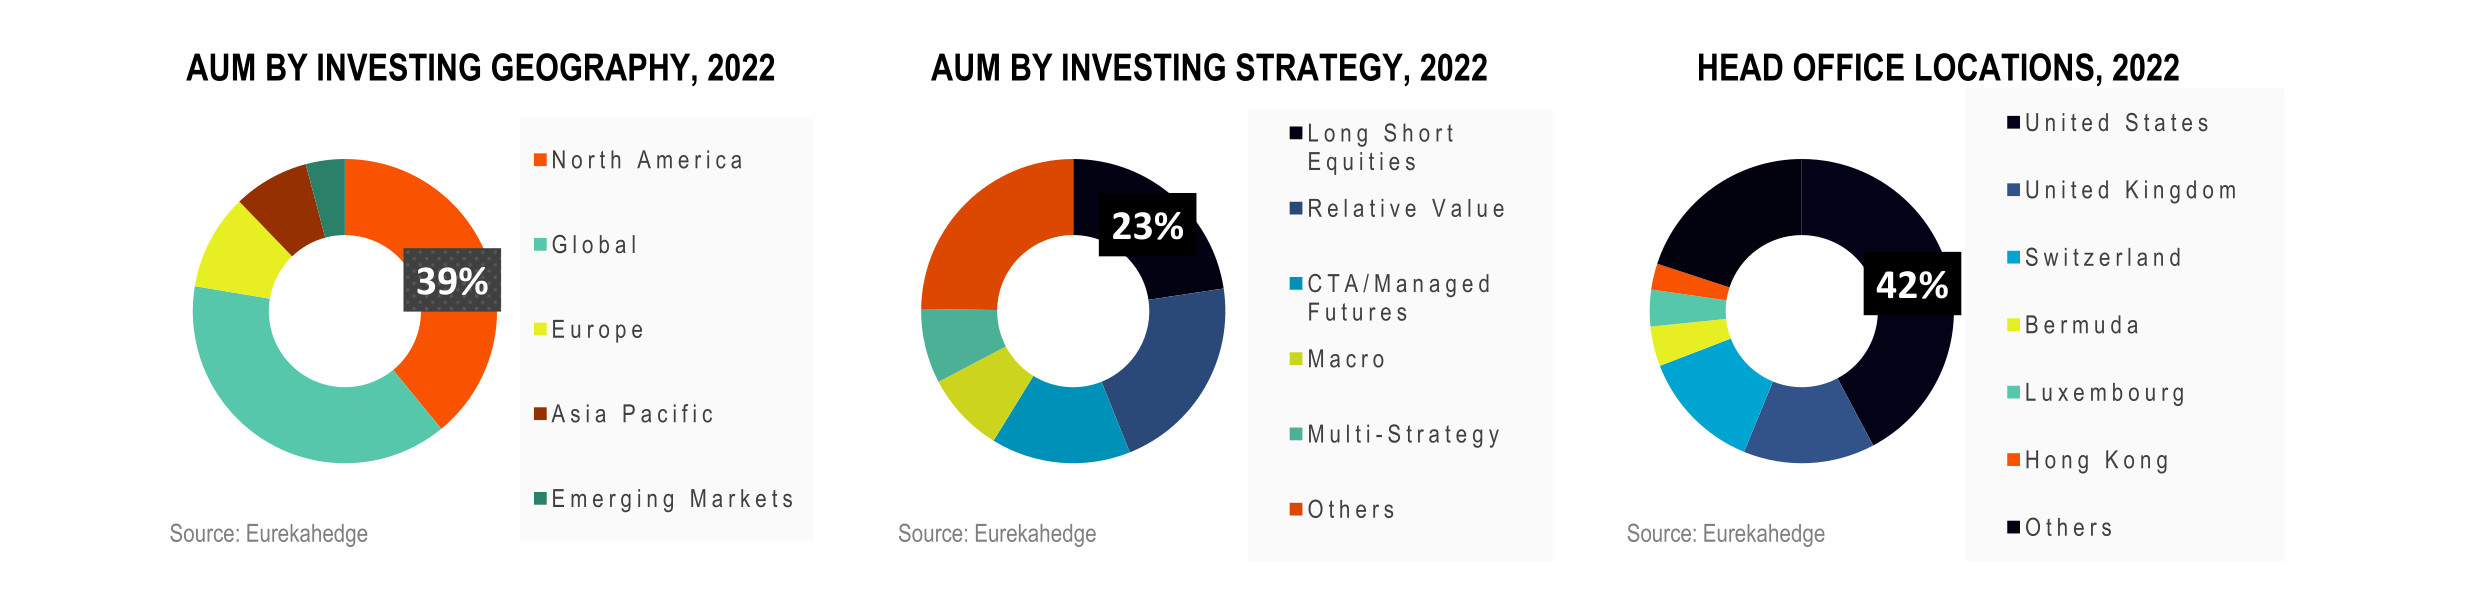 Fund of Hedge Funds Infographic June 2022 - AUM by investing Geography